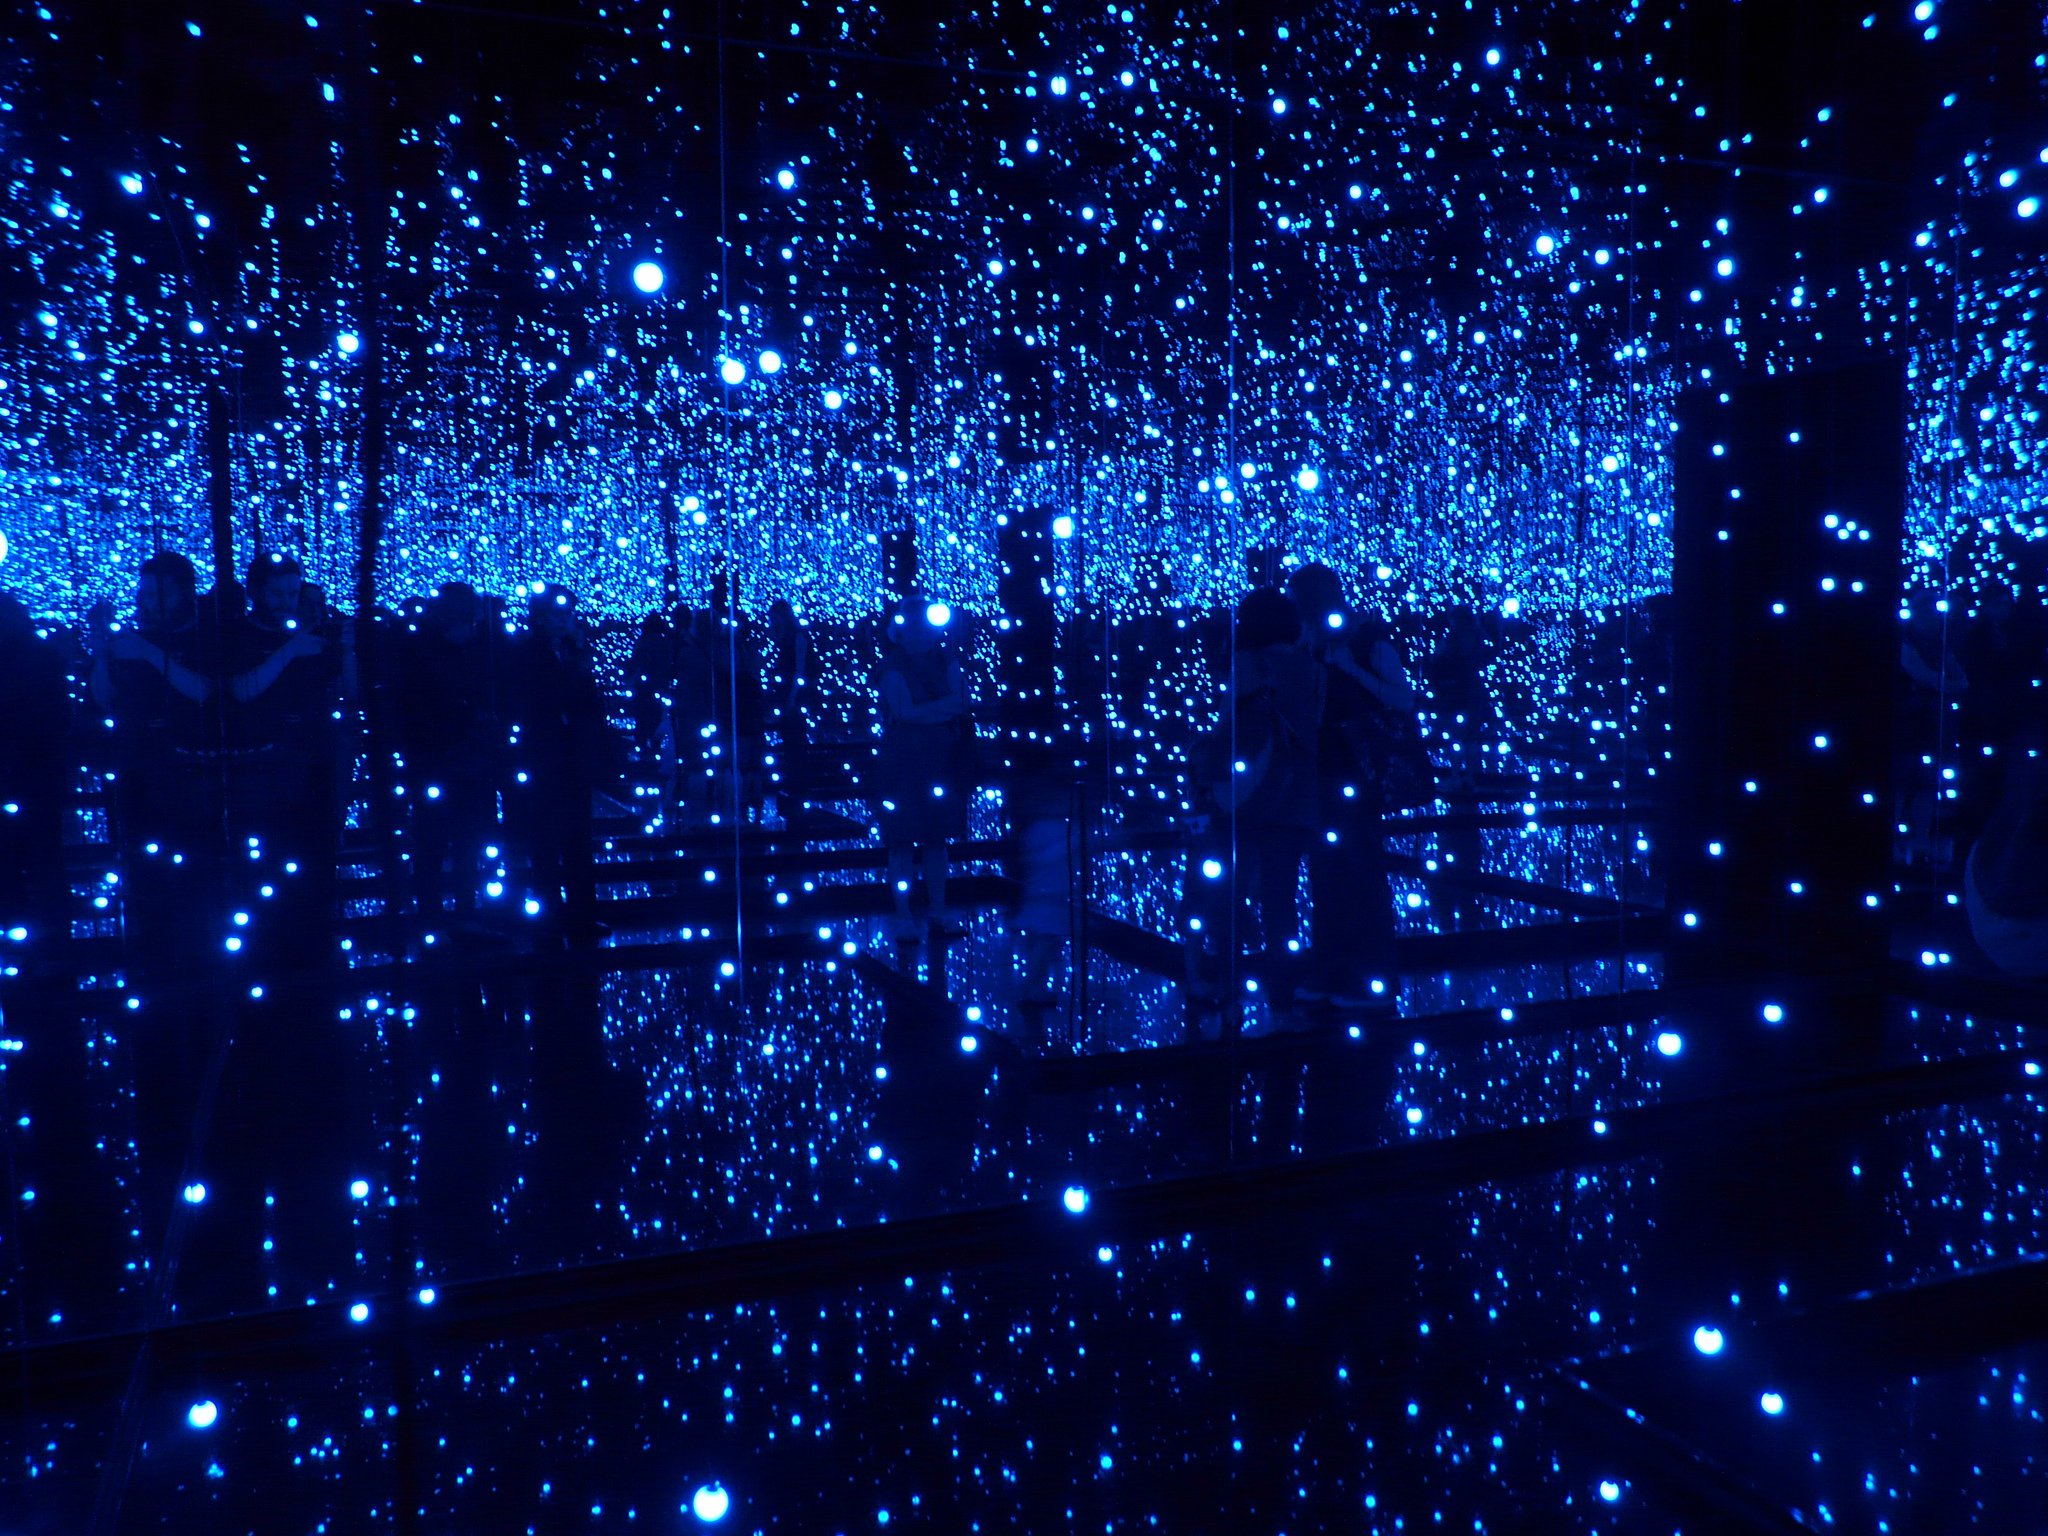 Yayoi Kusama, <em>Infinity Mirrored Room- Filled With the Brilliance of Life</em>. Courtesy of Flickr Creative Commons.